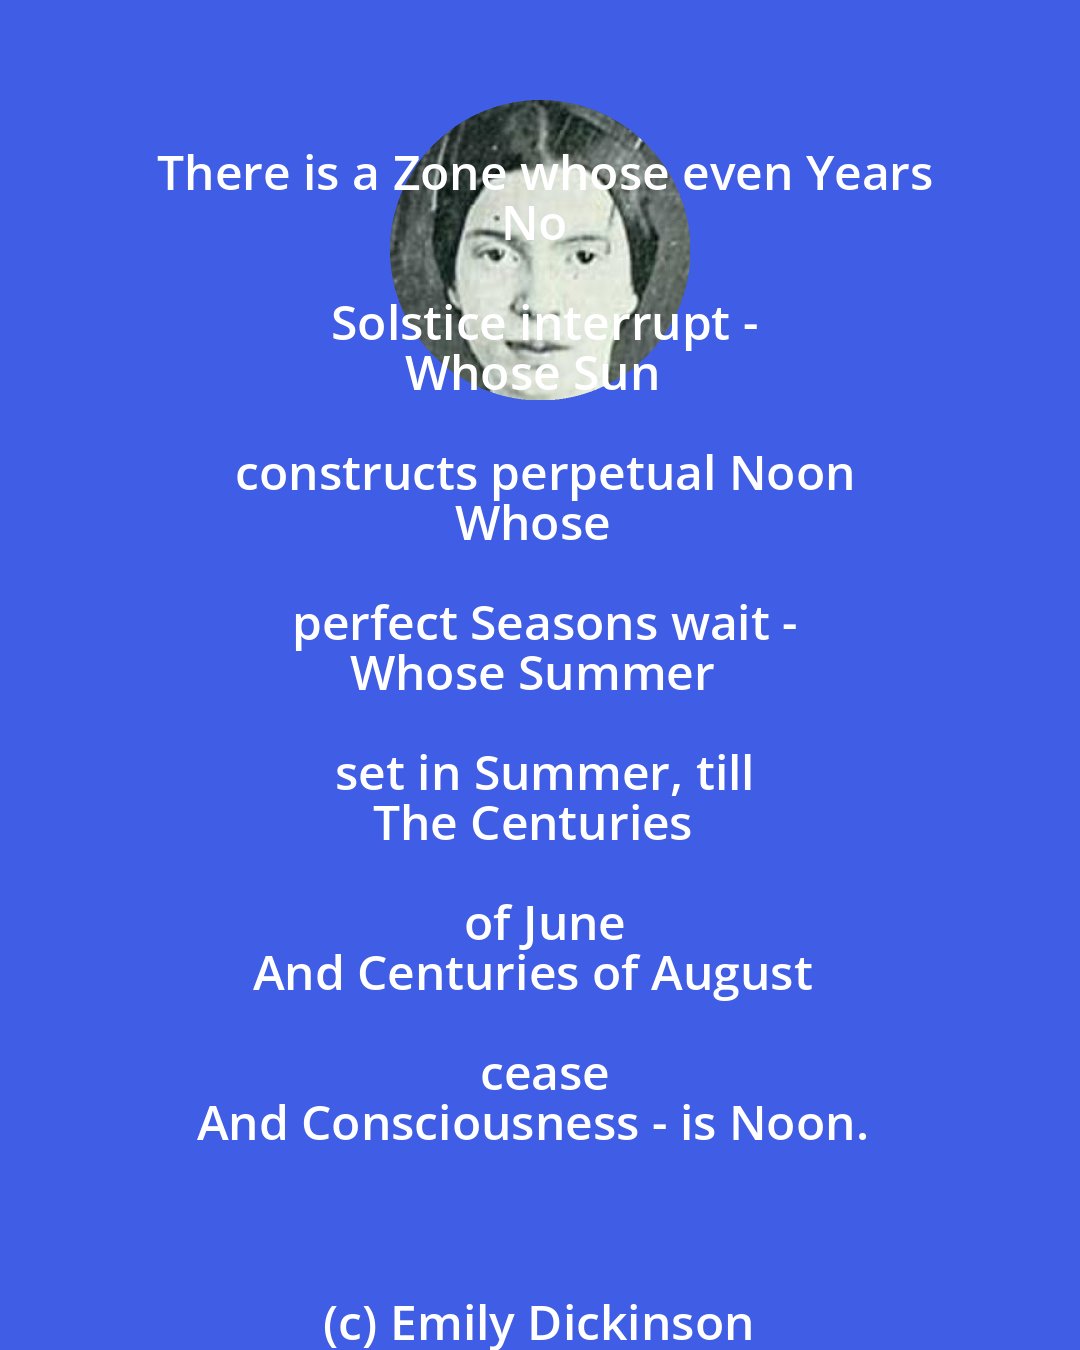 Emily Dickinson: There is a Zone whose even Years
No Solstice interrupt -
Whose Sun constructs perpetual Noon
Whose perfect Seasons wait -
Whose Summer set in Summer, till
The Centuries of June
And Centuries of August cease
And Consciousness - is Noon.